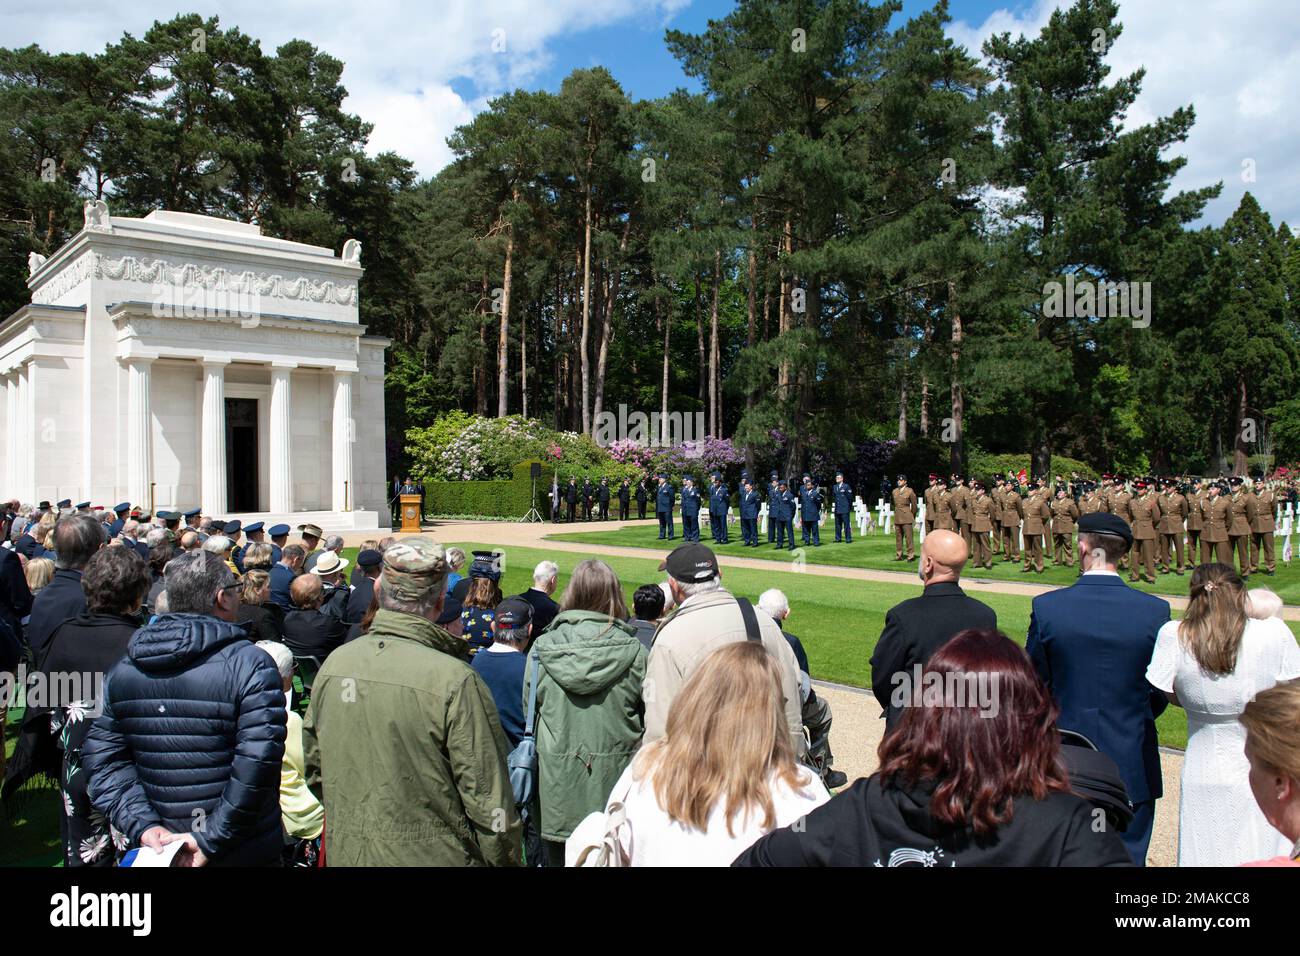 Armed Forces and guests gather for a Memorial Day ceremony at the Brookwood American Military Cemetery, England, May 29, 2022. Memorial Day provides us a solemn opportunity to remember our fallen brothers and sisters in arms, reflect upon their courageous sacrifice, and show gratitude for the freedom they gave their lives to defend. It also affords us the opportunity to pay homage to those families who lost their loved ones in service to the Nation-and continue to feel the full weight of that sacrifice today. Stock Photo